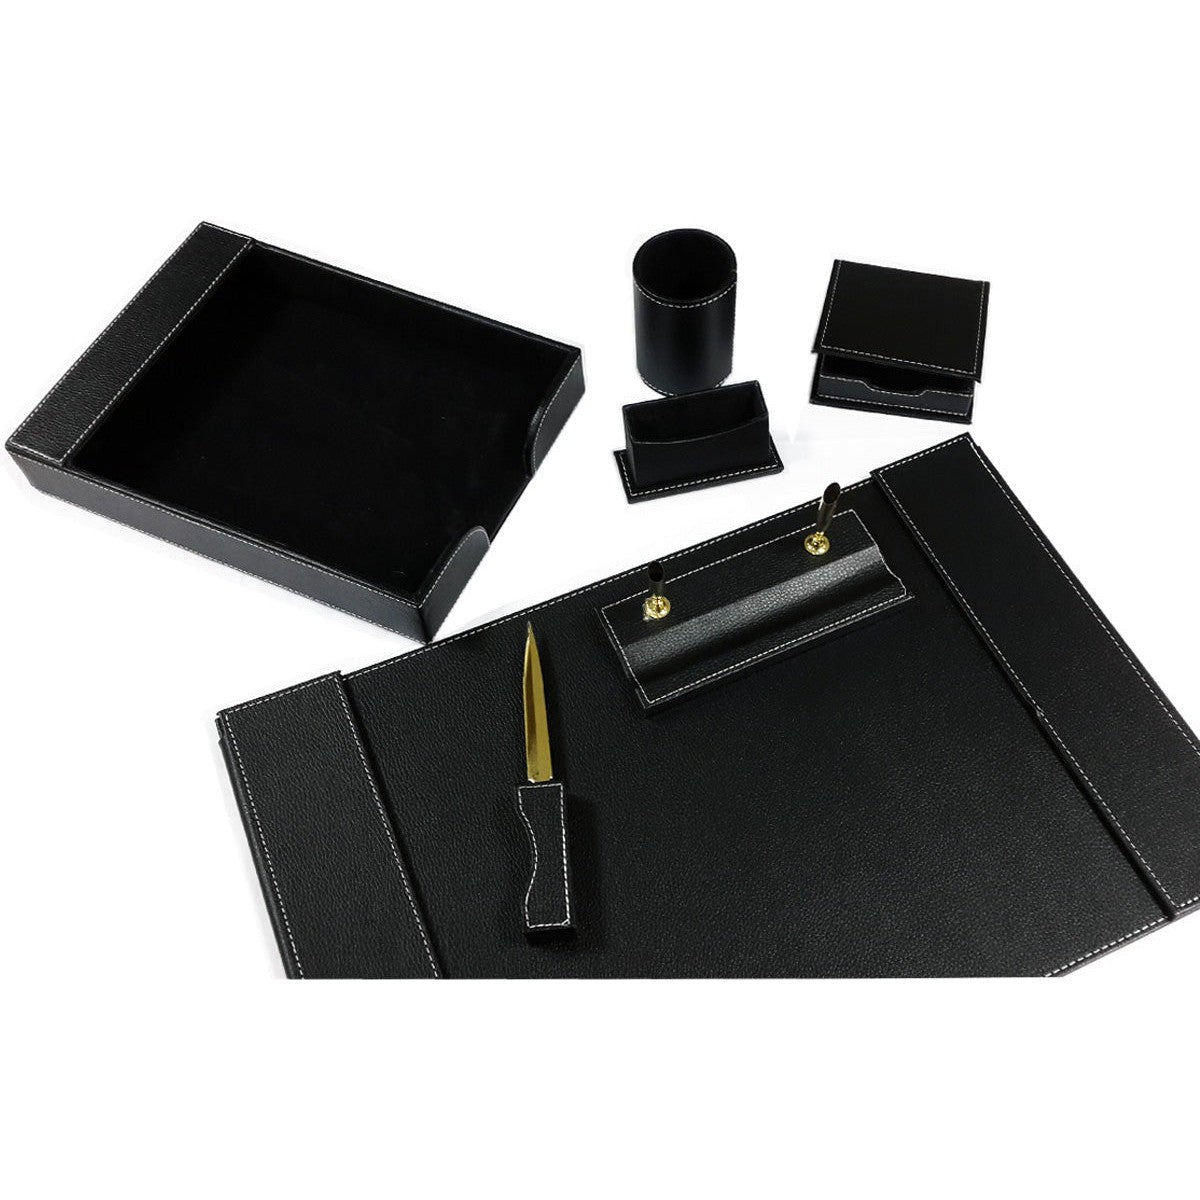 Desk Set Leather Exquisit Style 7 Pcs-Accessories And Organizers-Other-Star Light Kuwait